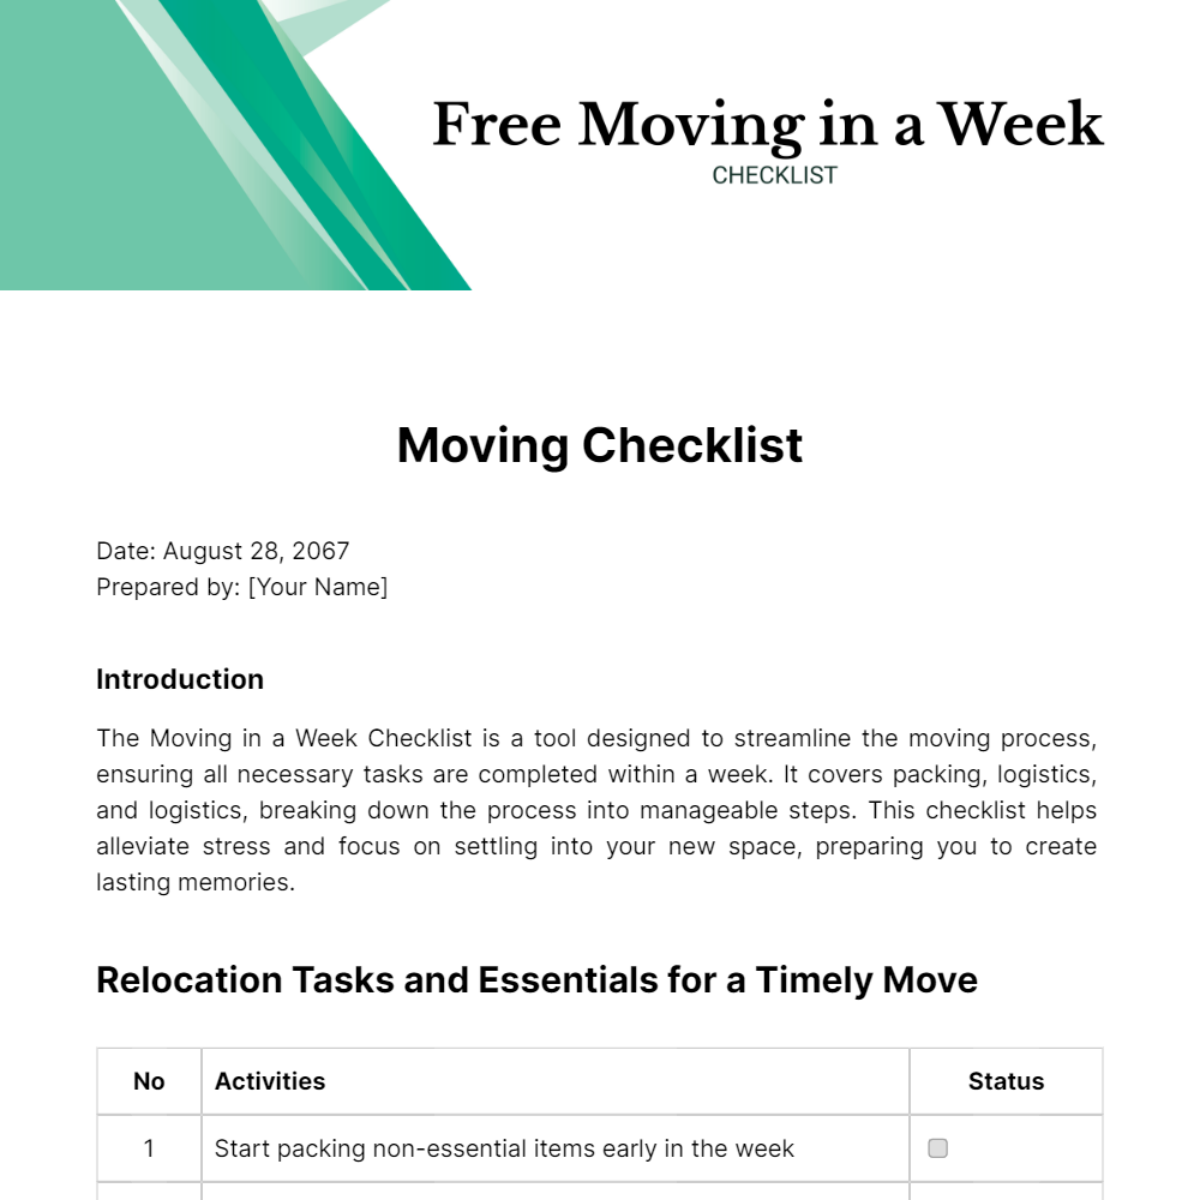 Moving in a Week Checklist Template